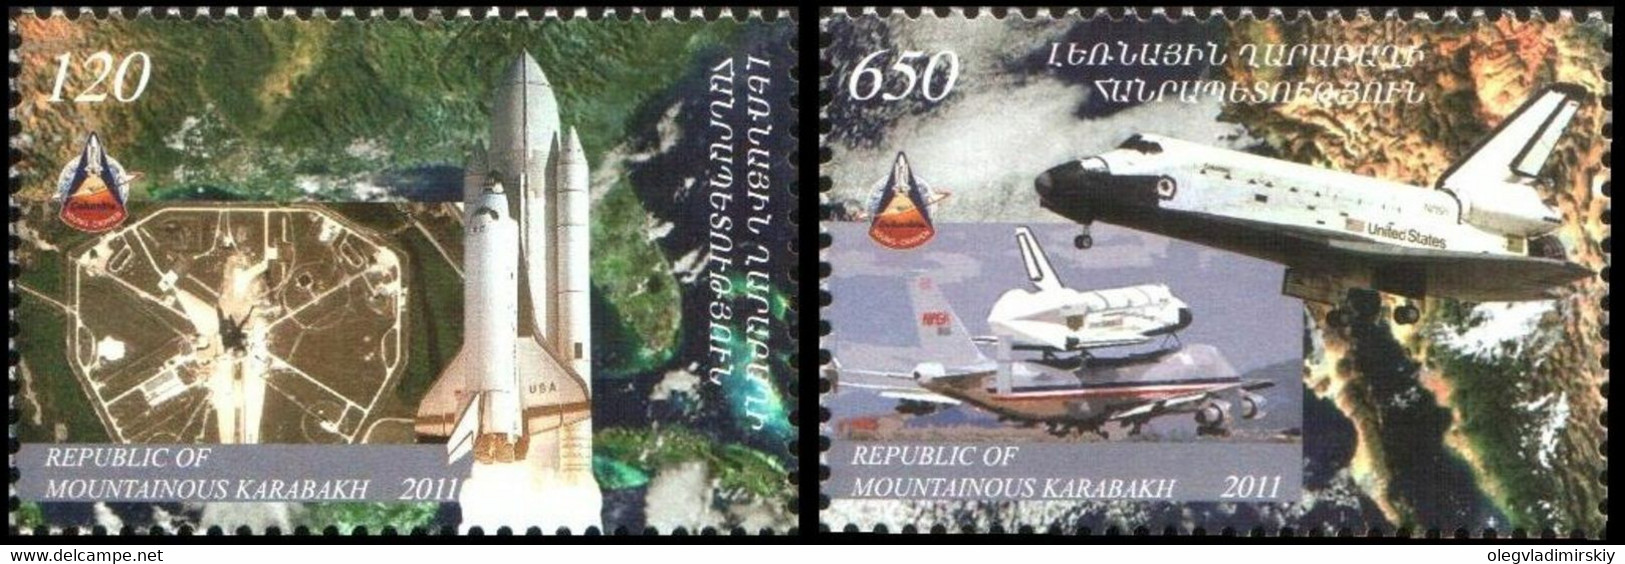 Armenia Mountain Karabakh Artsakh 2011 30th Anniversary Of The First Space Shuttle Launch Set Of 2 Stamps Mint - United States